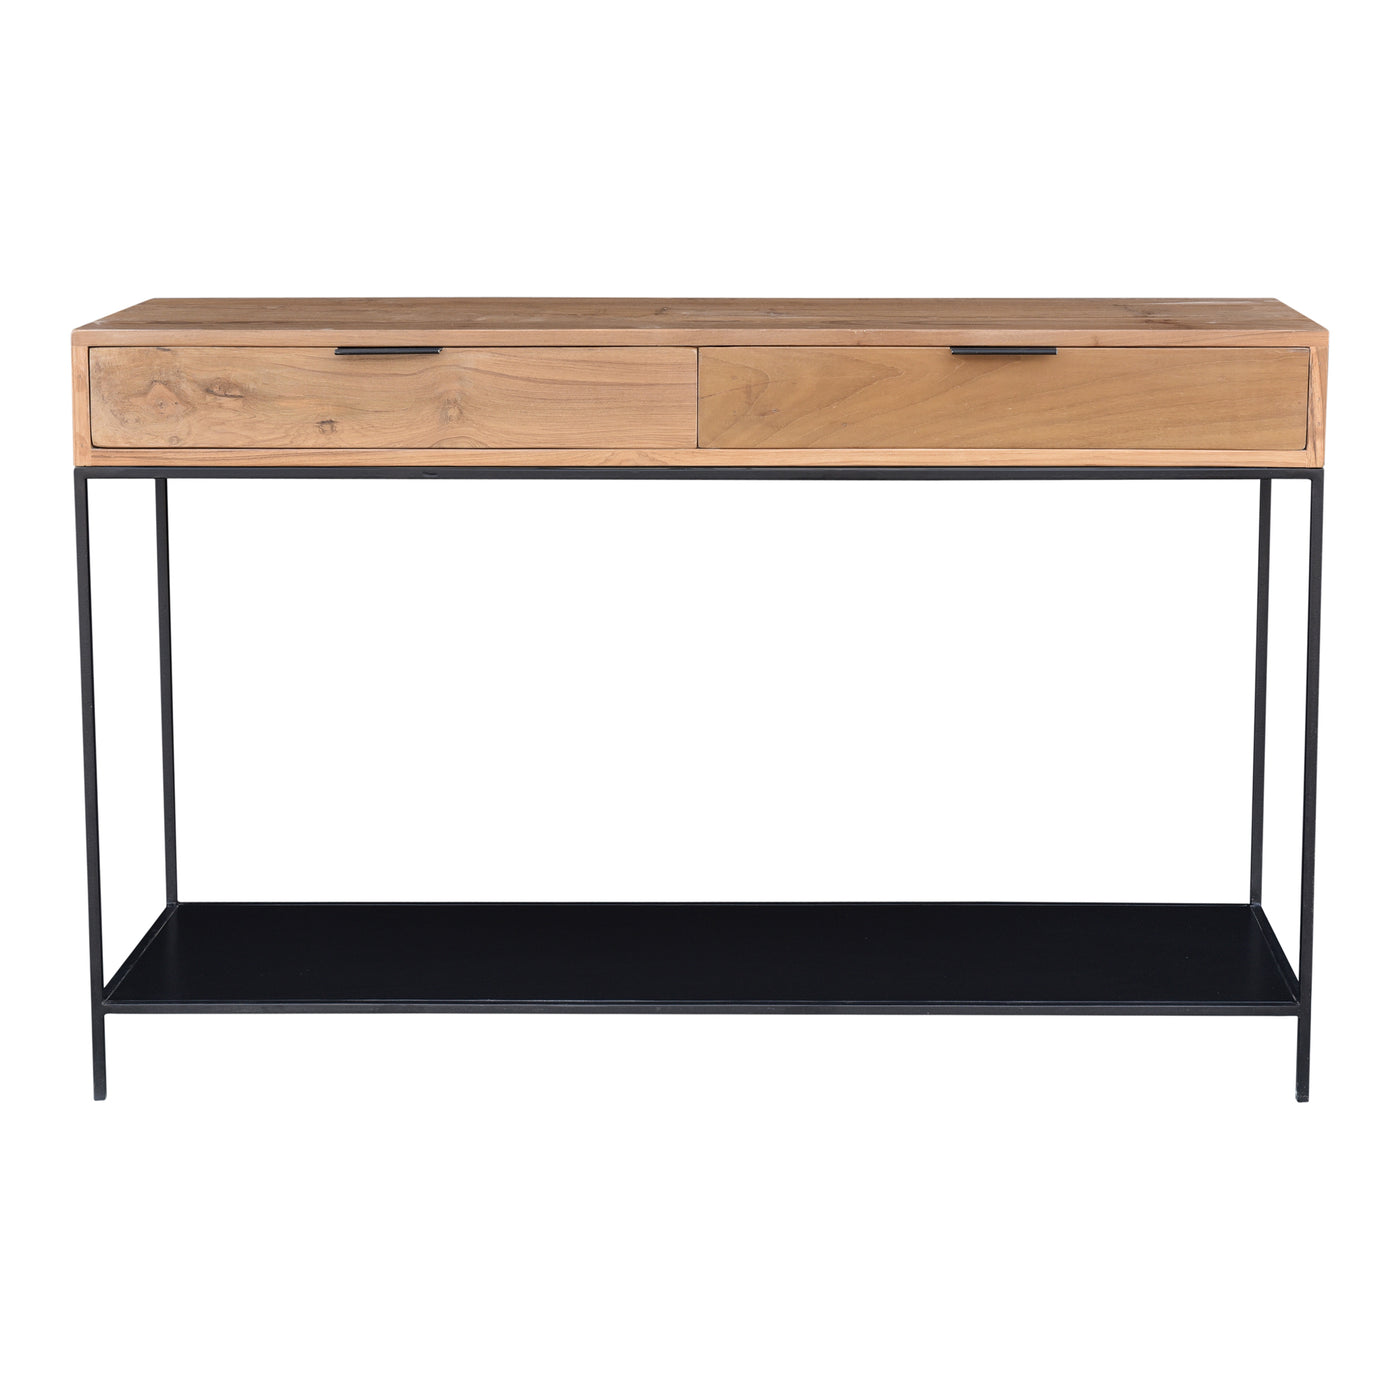 Made from solid teak wood, the Joliet Console Table brings a contemporary edge to your space. Two spacious drawers for sto...